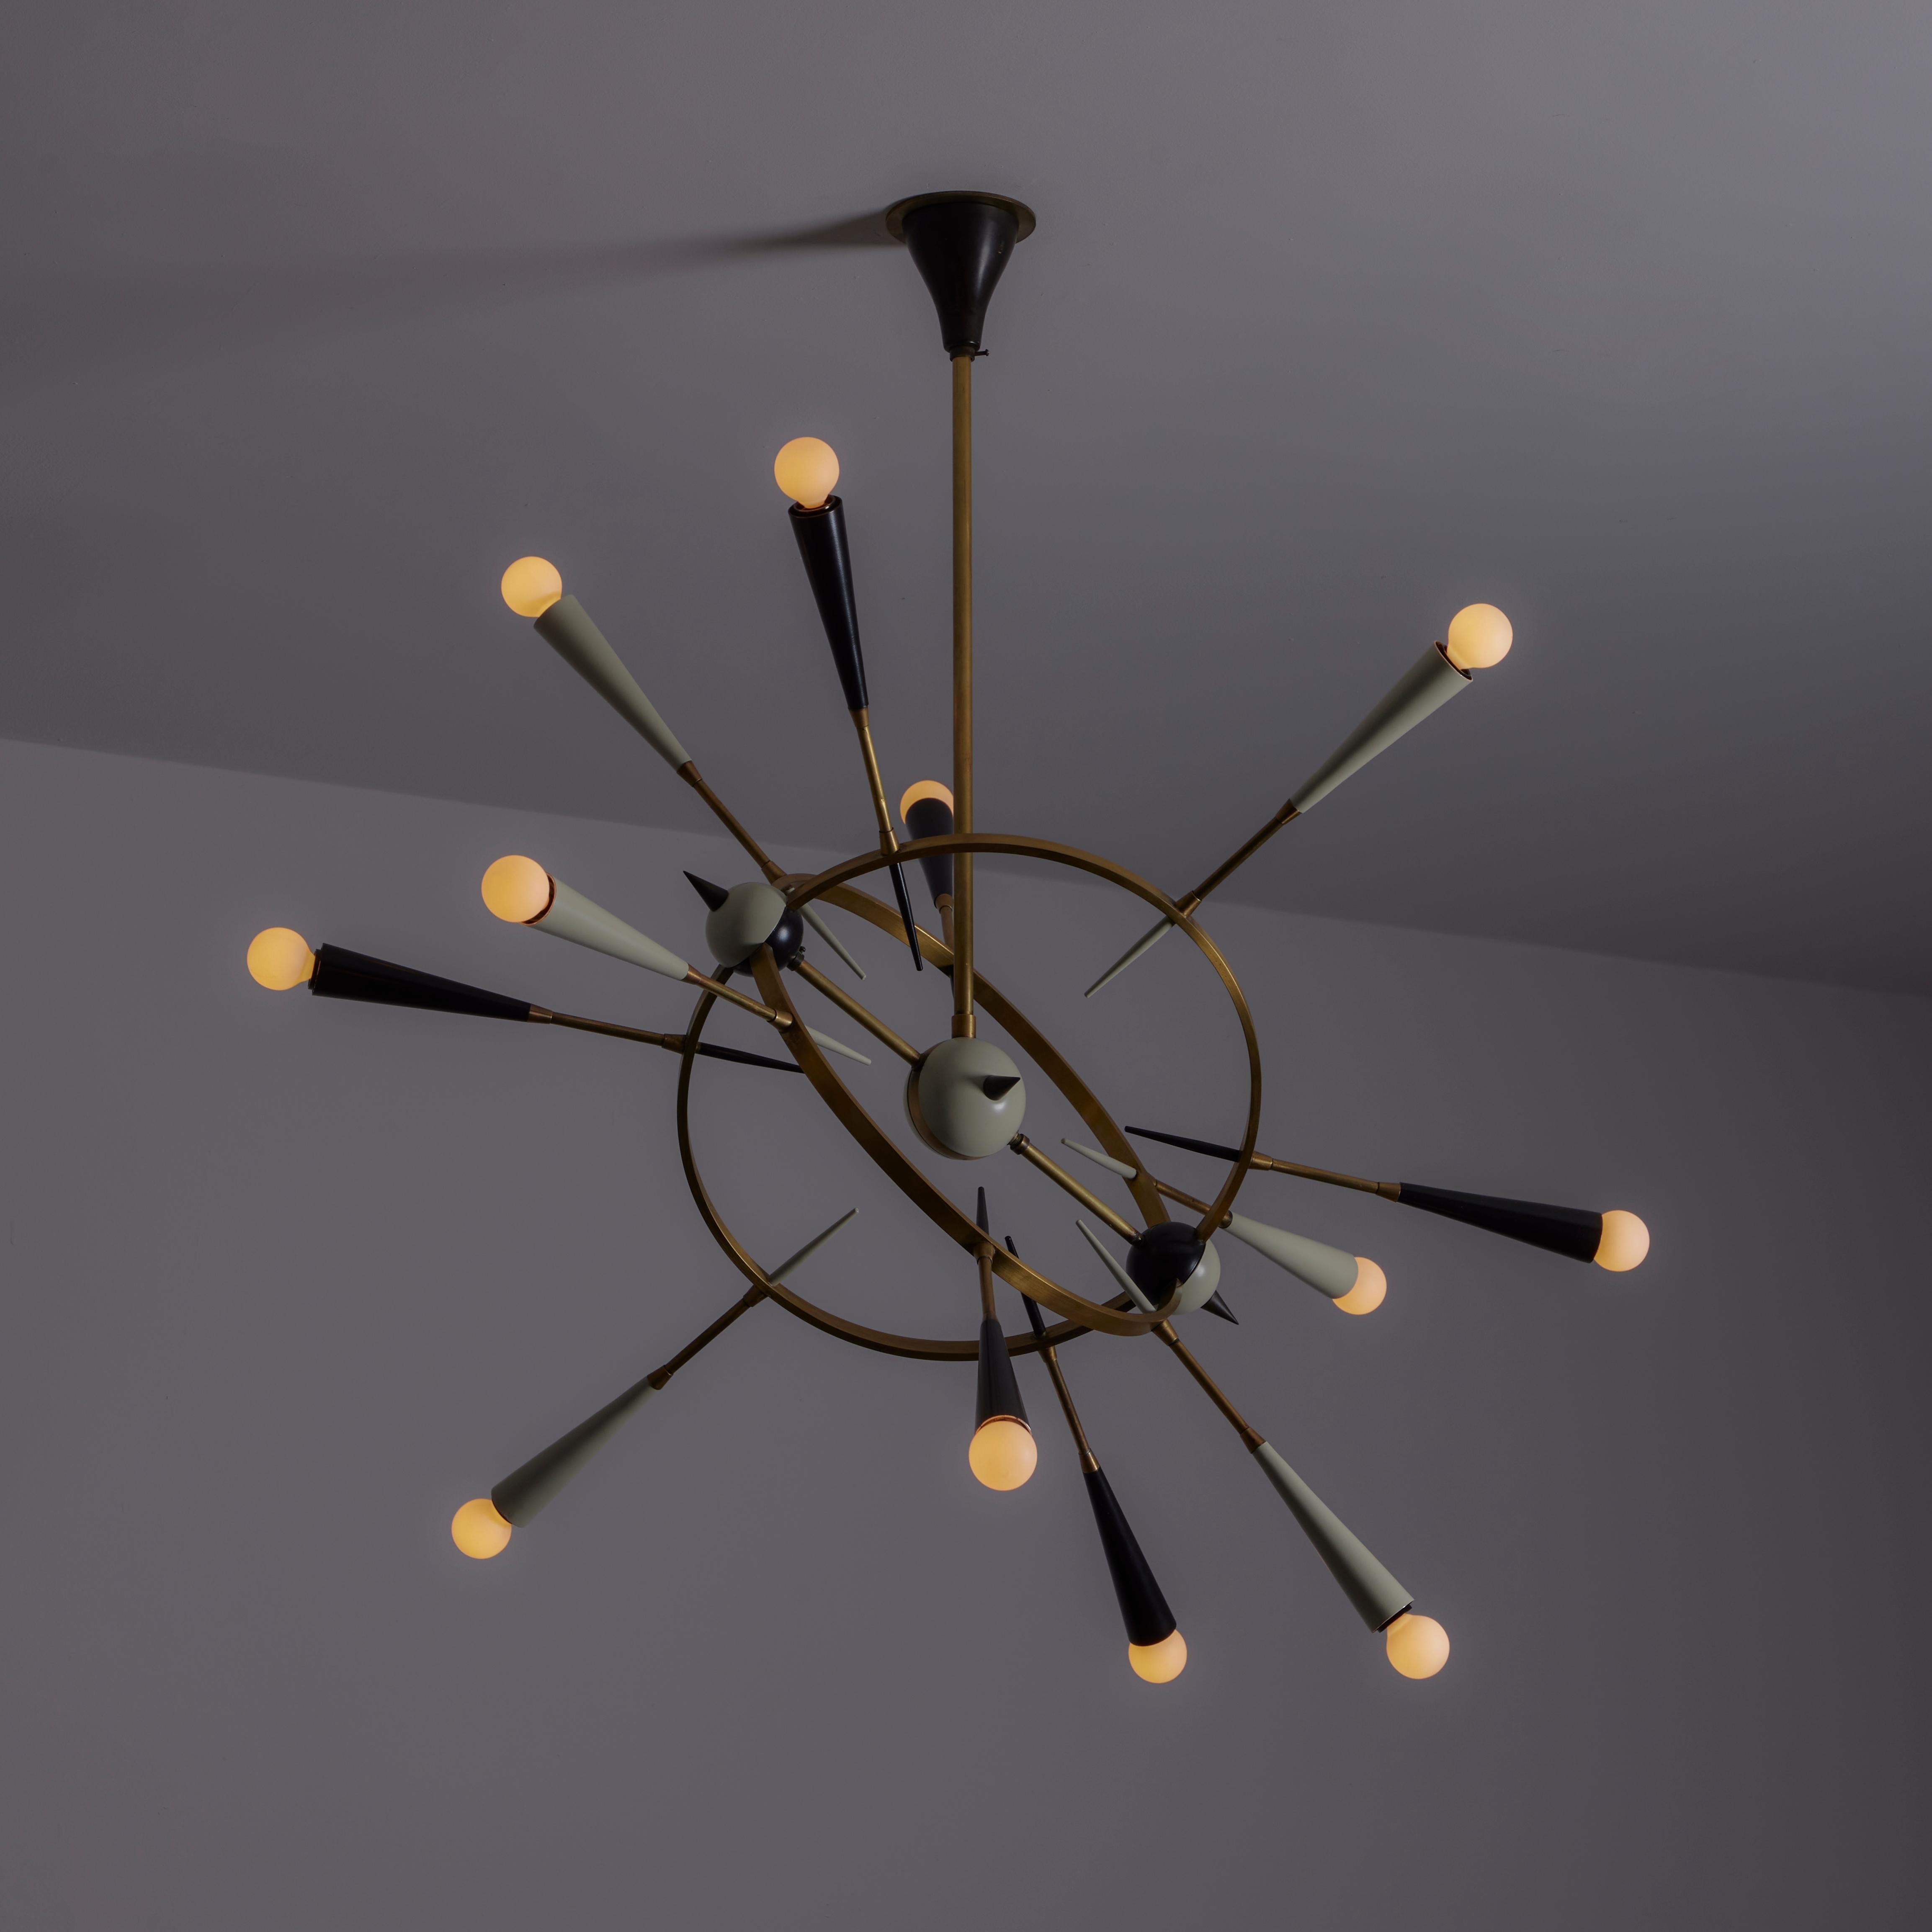 Orbital Ceiling Light by Stilnovo Designed and manufactured in Italy, circa the 1950s. A planetary chandelier consisting of two rings on an axis point. The axis point can be rotated to around 15-20 degrees to achieve a few different orientations.